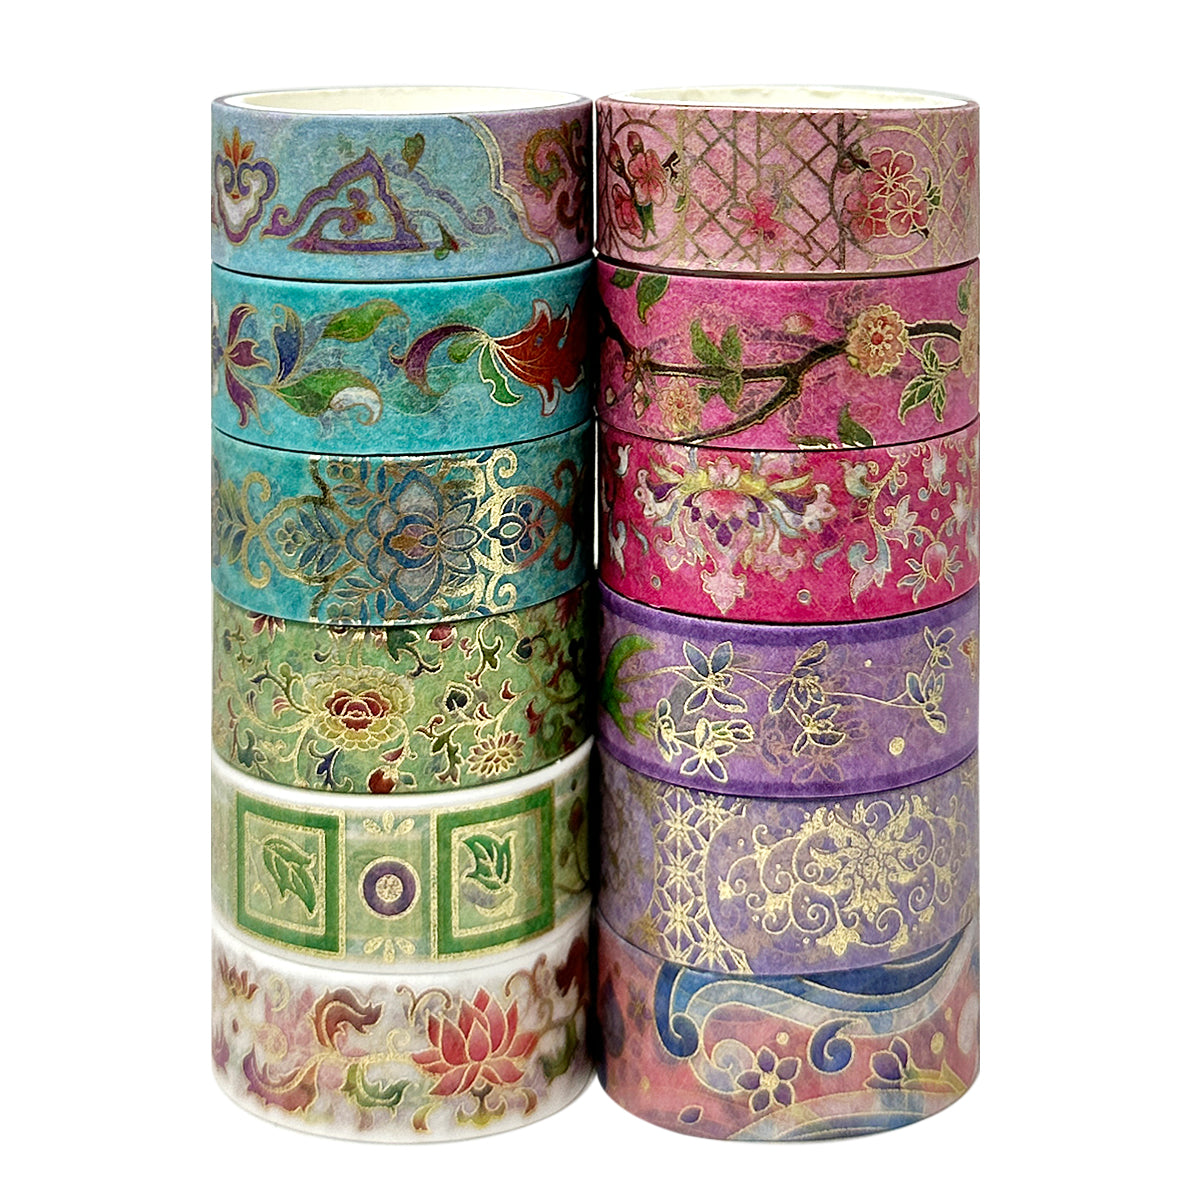 Wrapables Elegant Gold Foil Washi Tape Box Set for Arts & Crafts, Scrapbooking, Stationery, Diary (12 Rolls) Romantic Floral